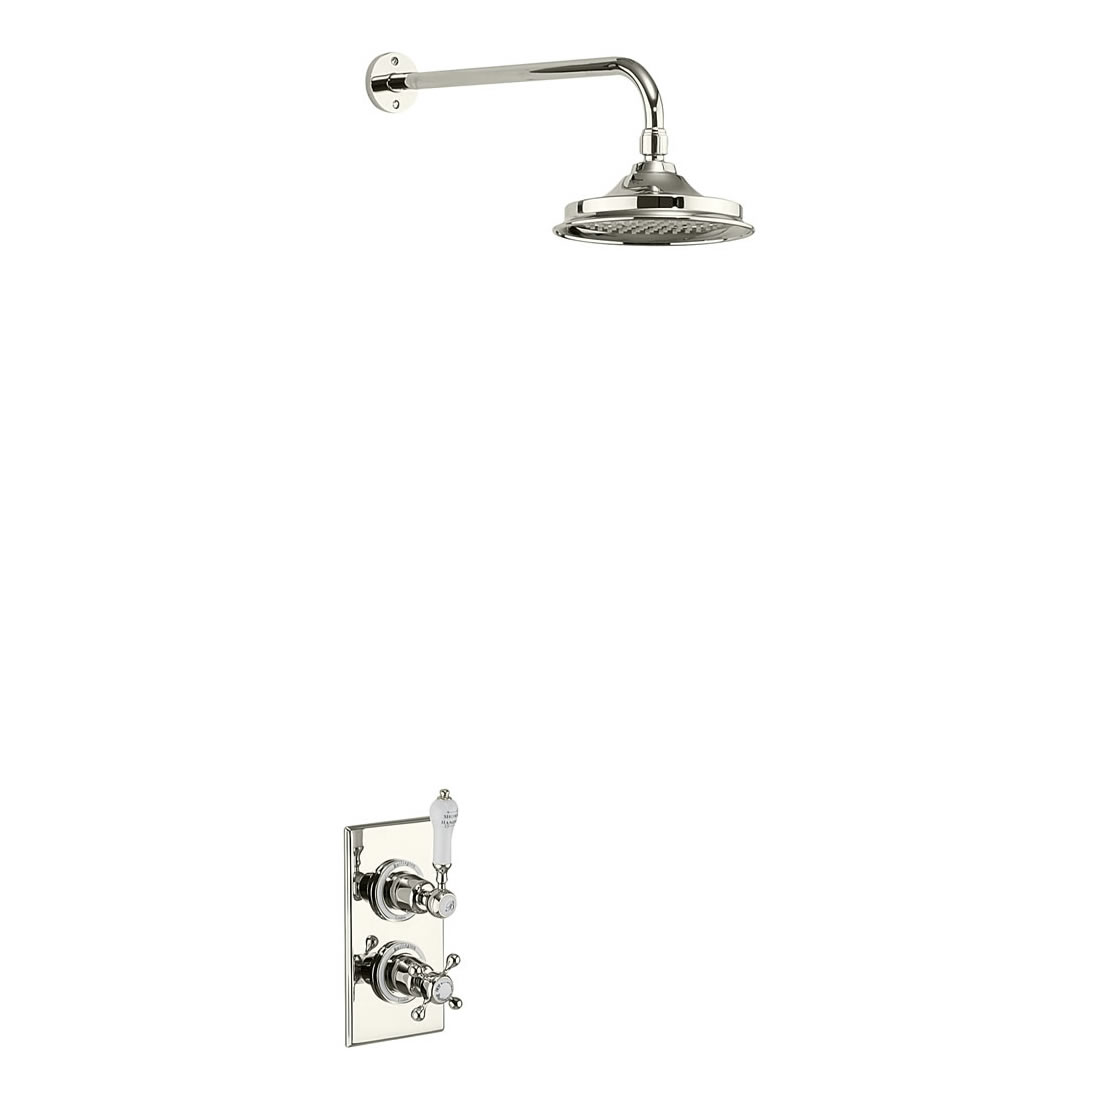 Trent Thermostatic Single Outlet Concealed Shower Valve with Fixed Shower Arm with 9 inch rose - NICKEL